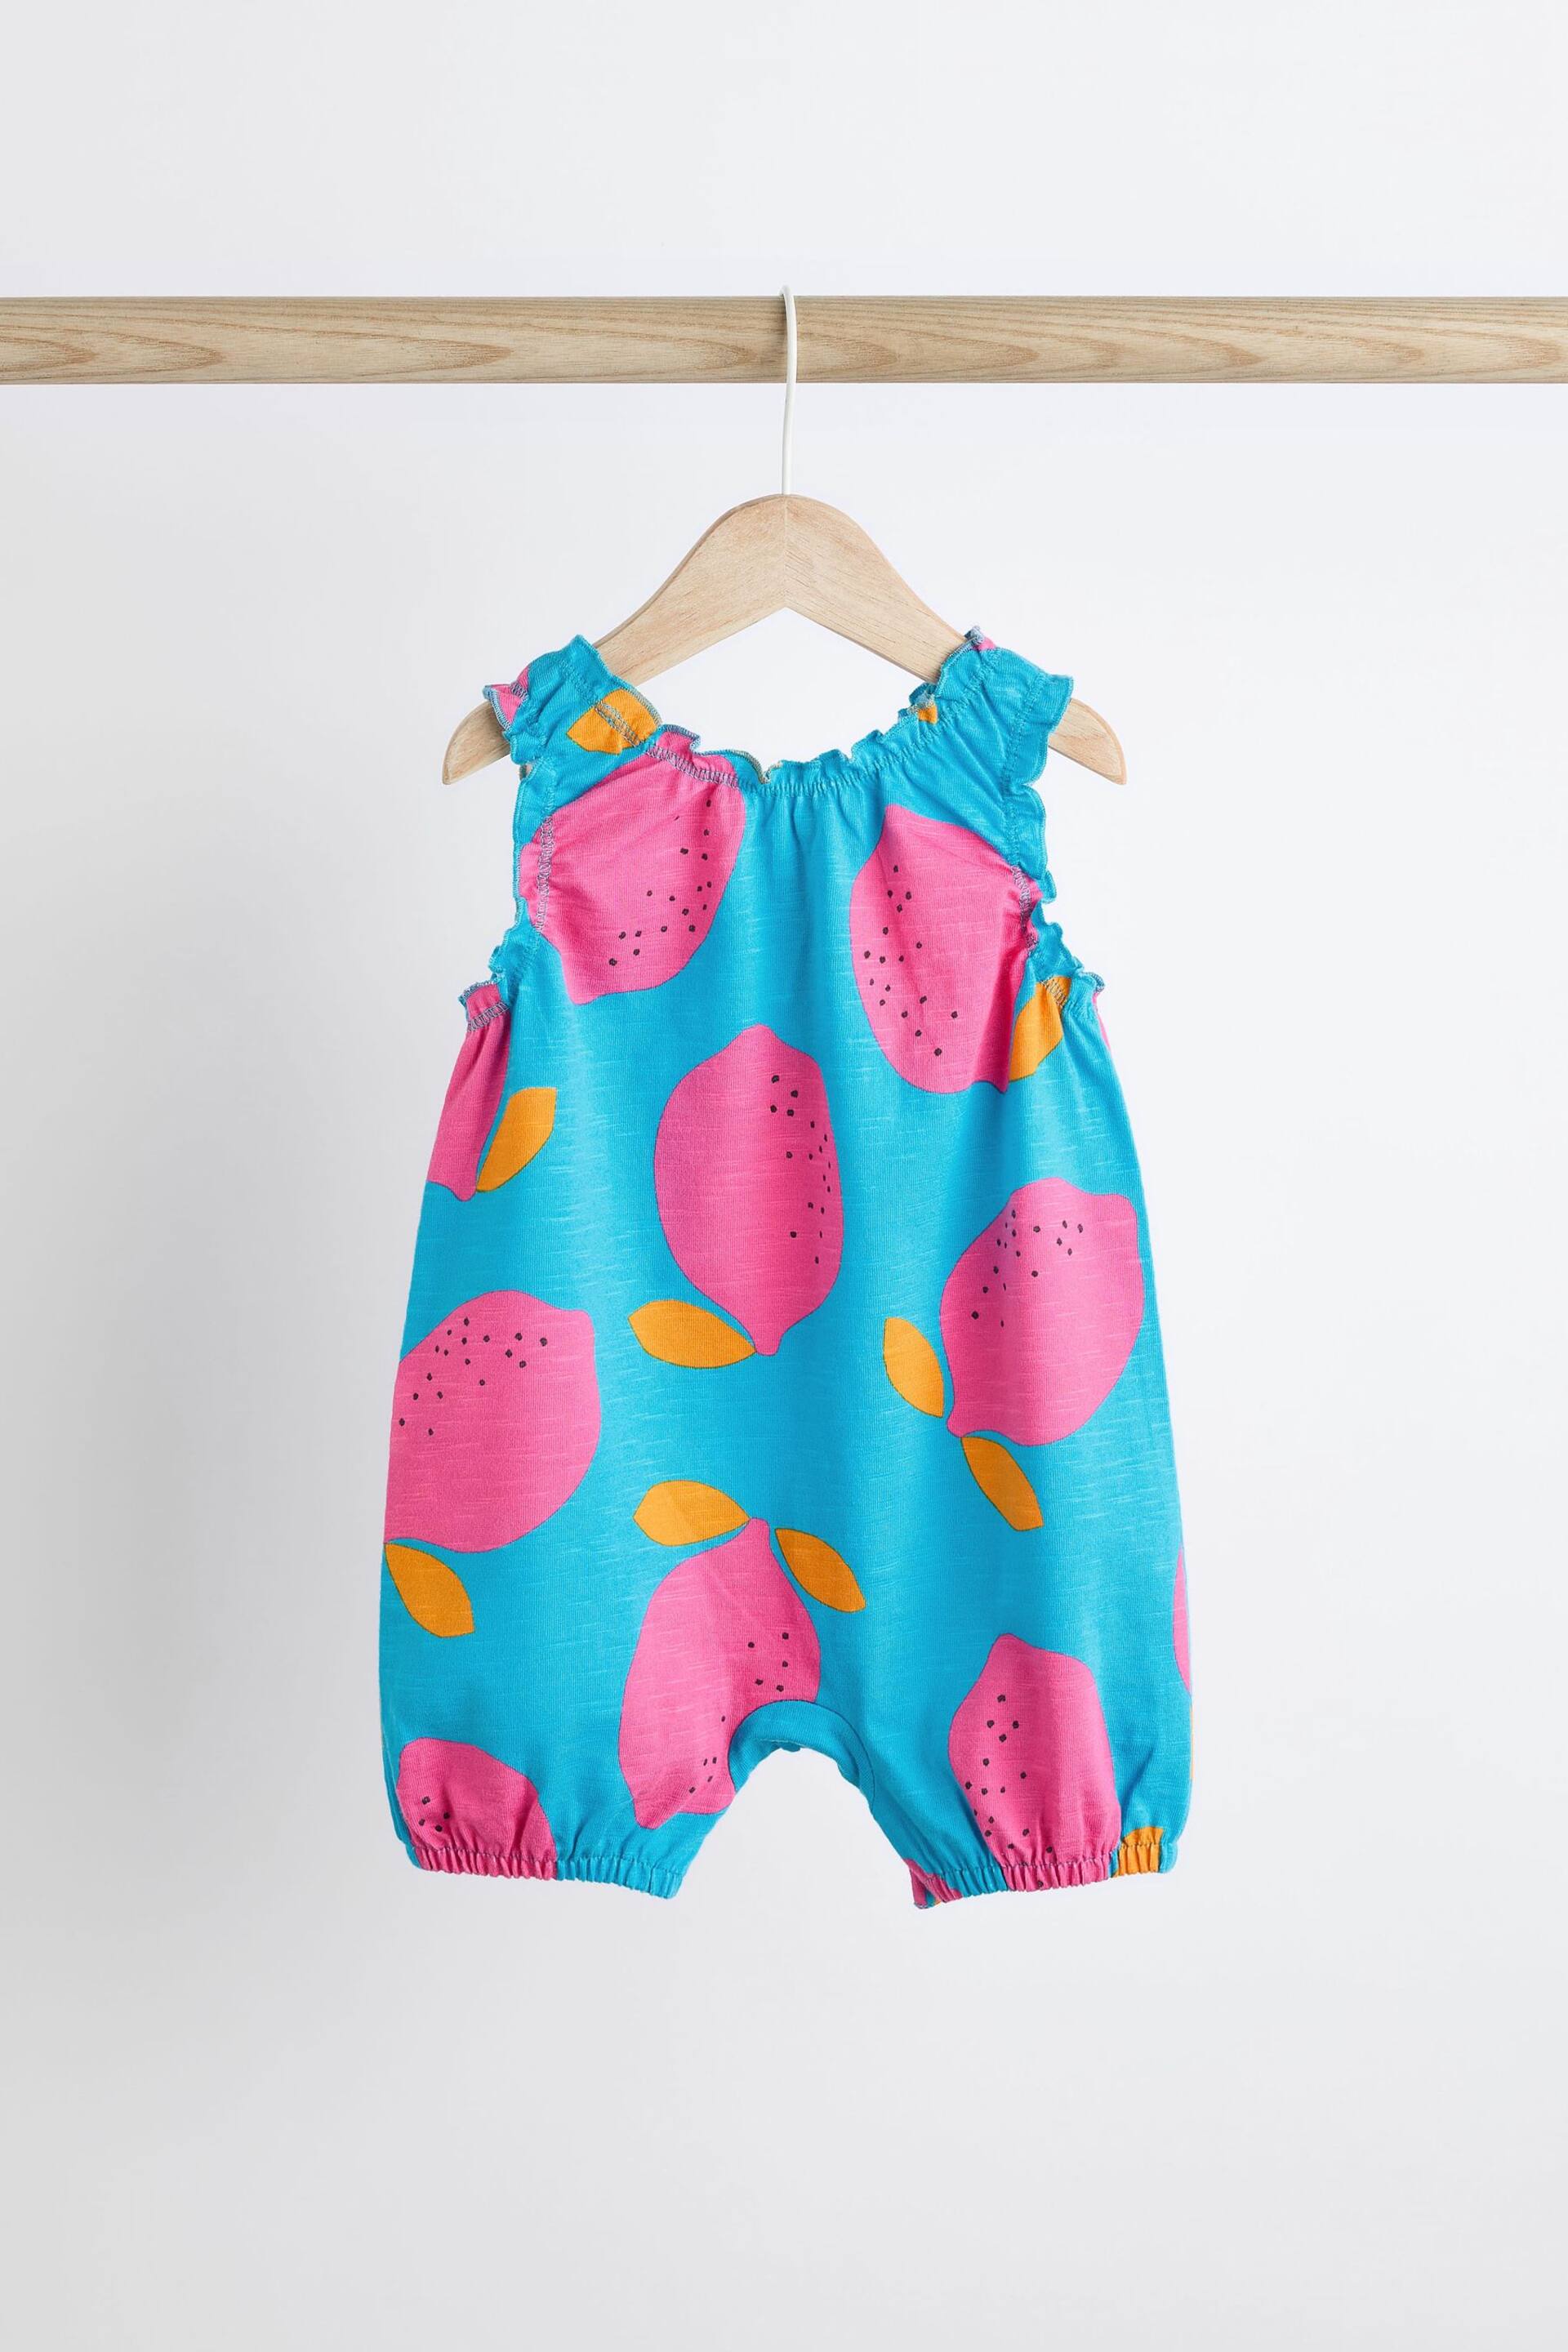 Multi Bright Fruit Baby Vest Rompers 3 Pack - Image 3 of 8